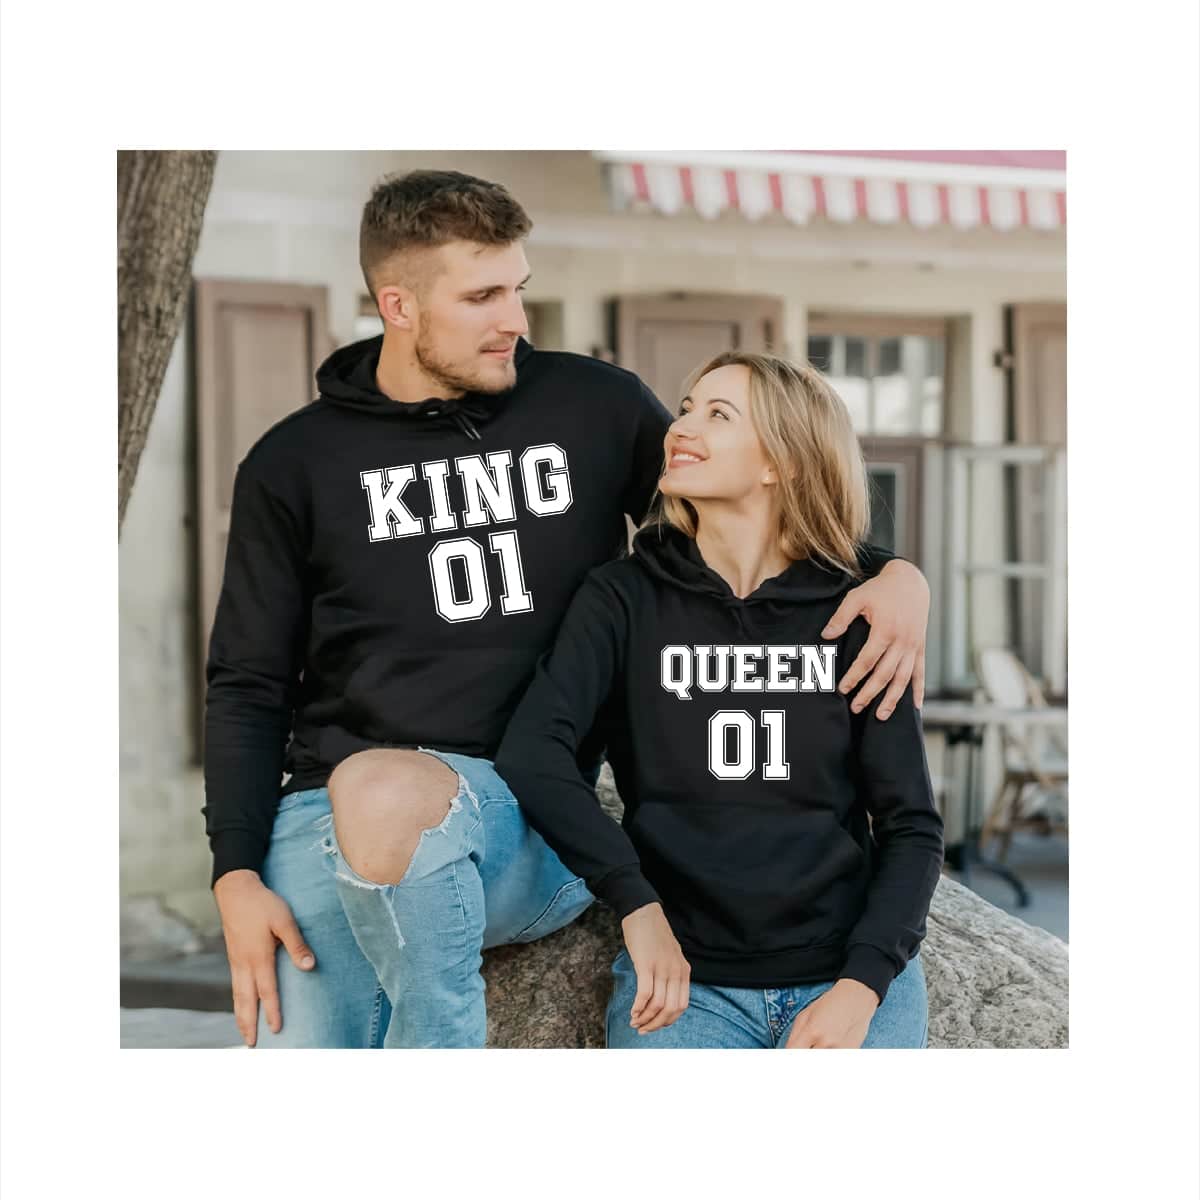 King and queen 01 couple black hoodies min